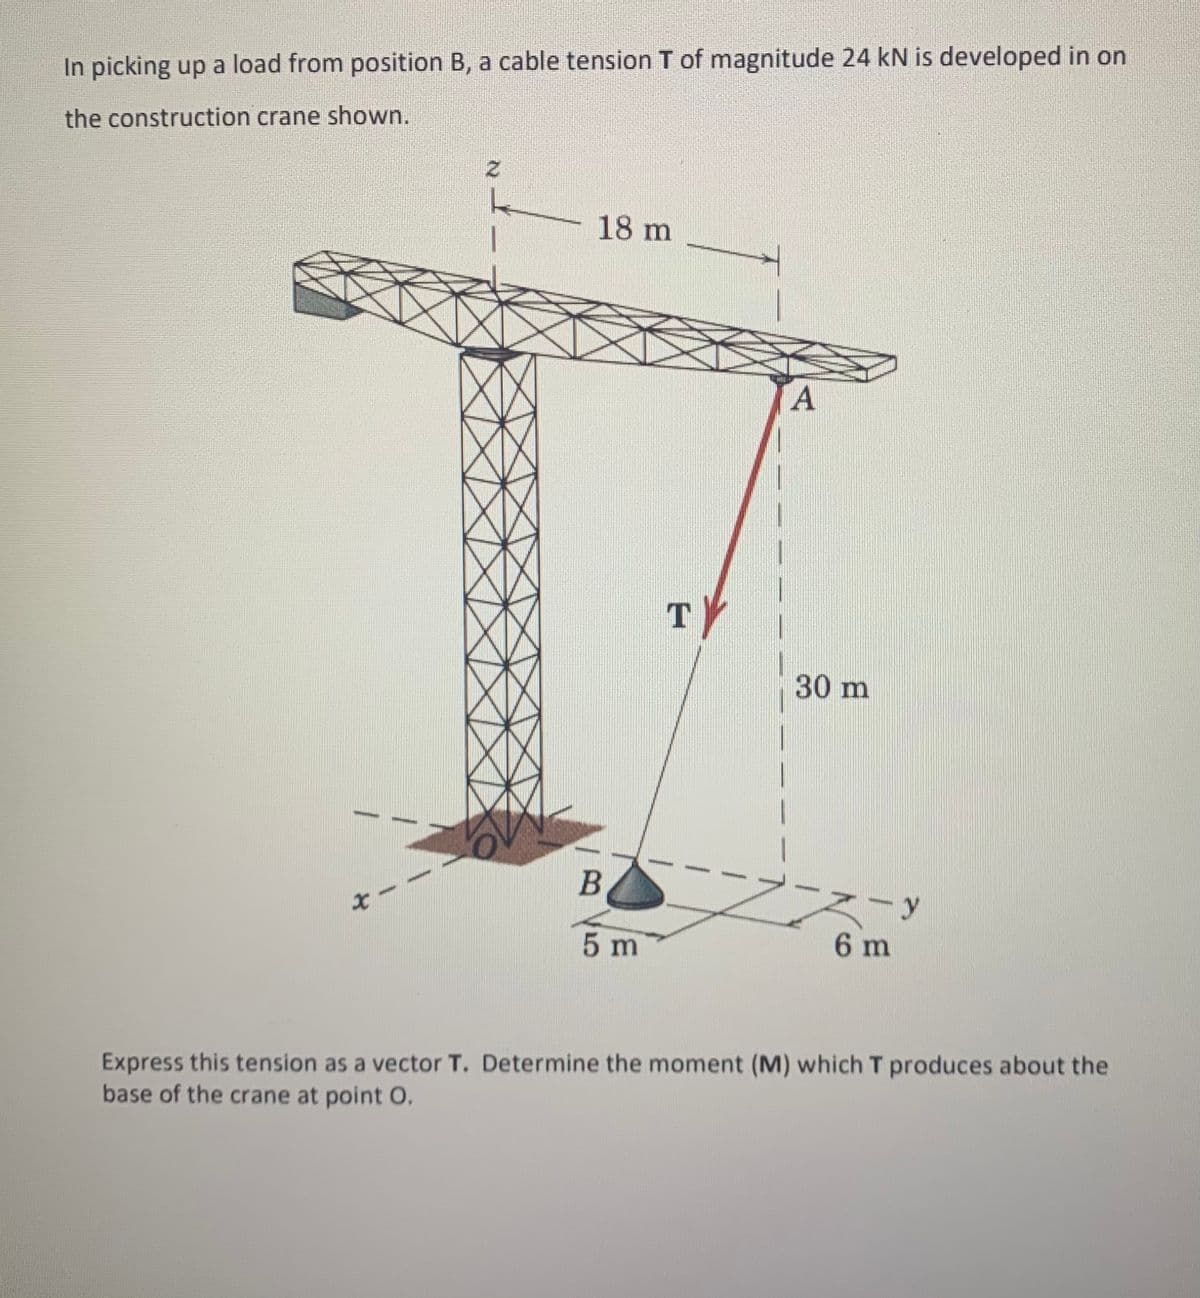 In picking up a load from position B, a cable tension T of magnitude 24 kN is developed in on
the construction crane shown.
18 m
TY
30 m
-y
5 m
6 m
Express this tension as a vector T. Determine the moment (M) which T produces about the
base of the crane at point O.
21
